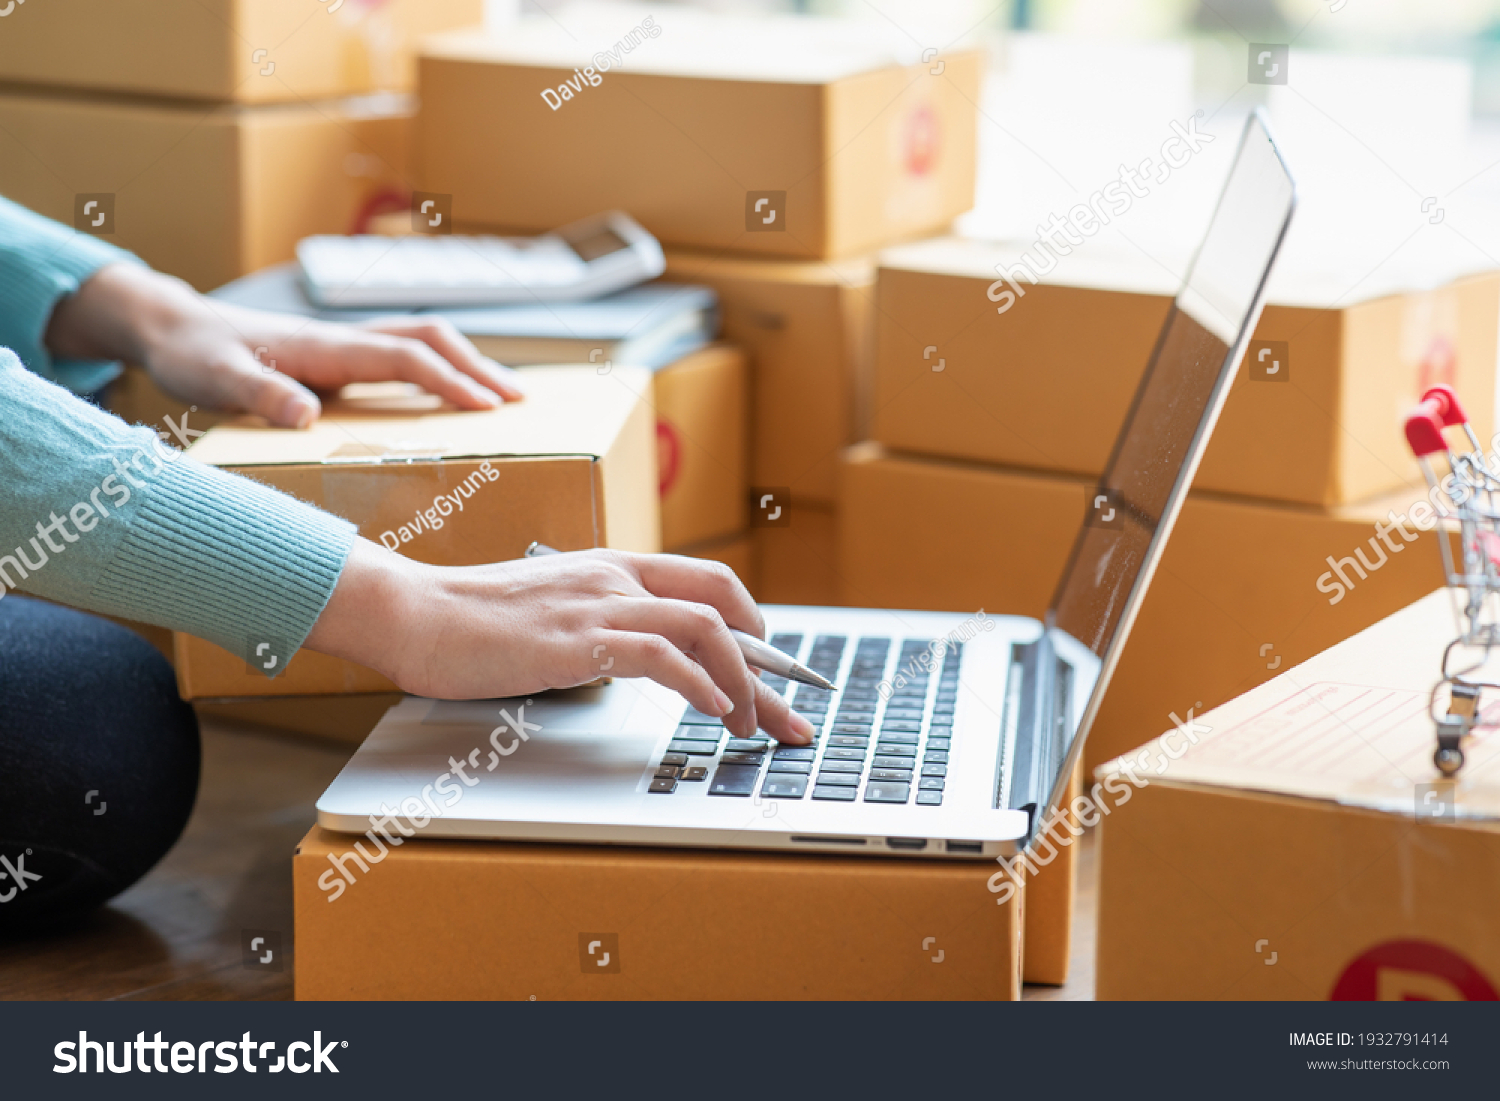 Starting small businesses SME owners female entrepreneurs Write the address on receipt box and check online orders to prepare to pack the boxes, sell to customers, sme business ideas online. #1932791414